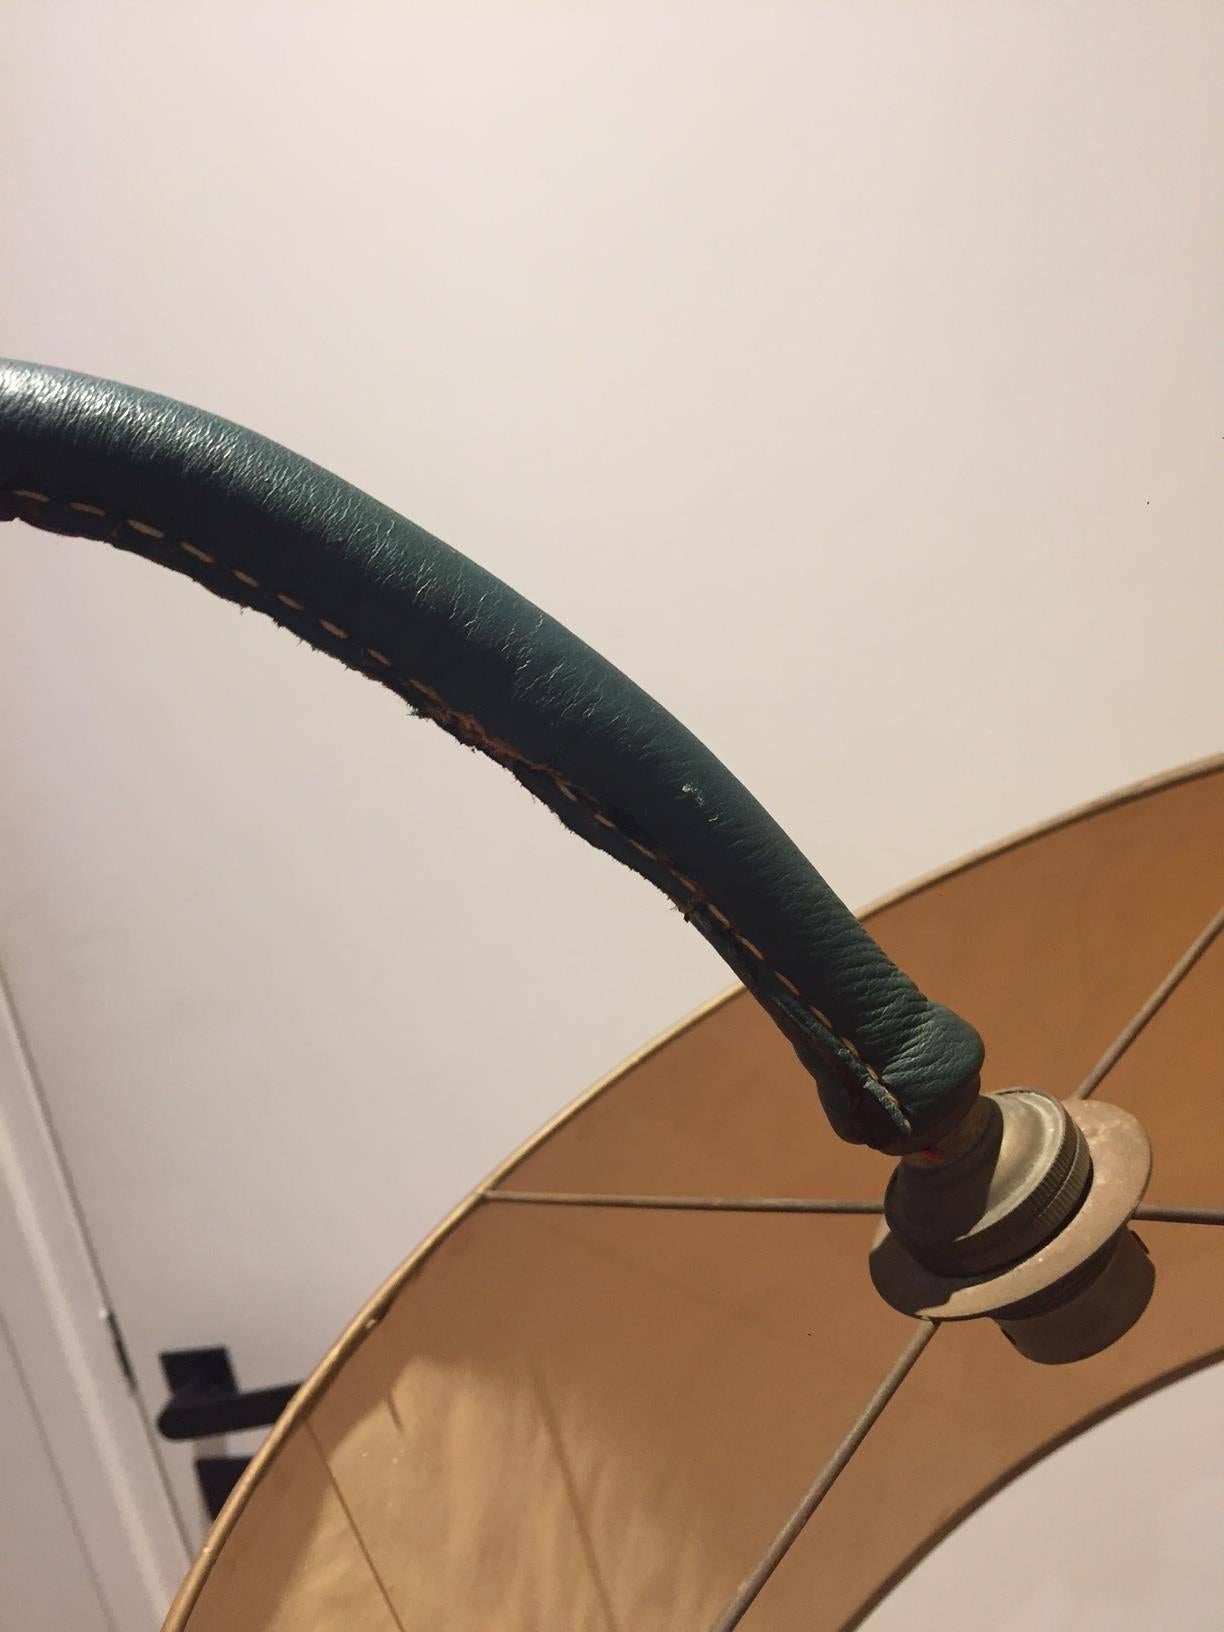 Jacques Adnet 1950s Rare Flexible Green Leather Floor Lamp For Sale 1